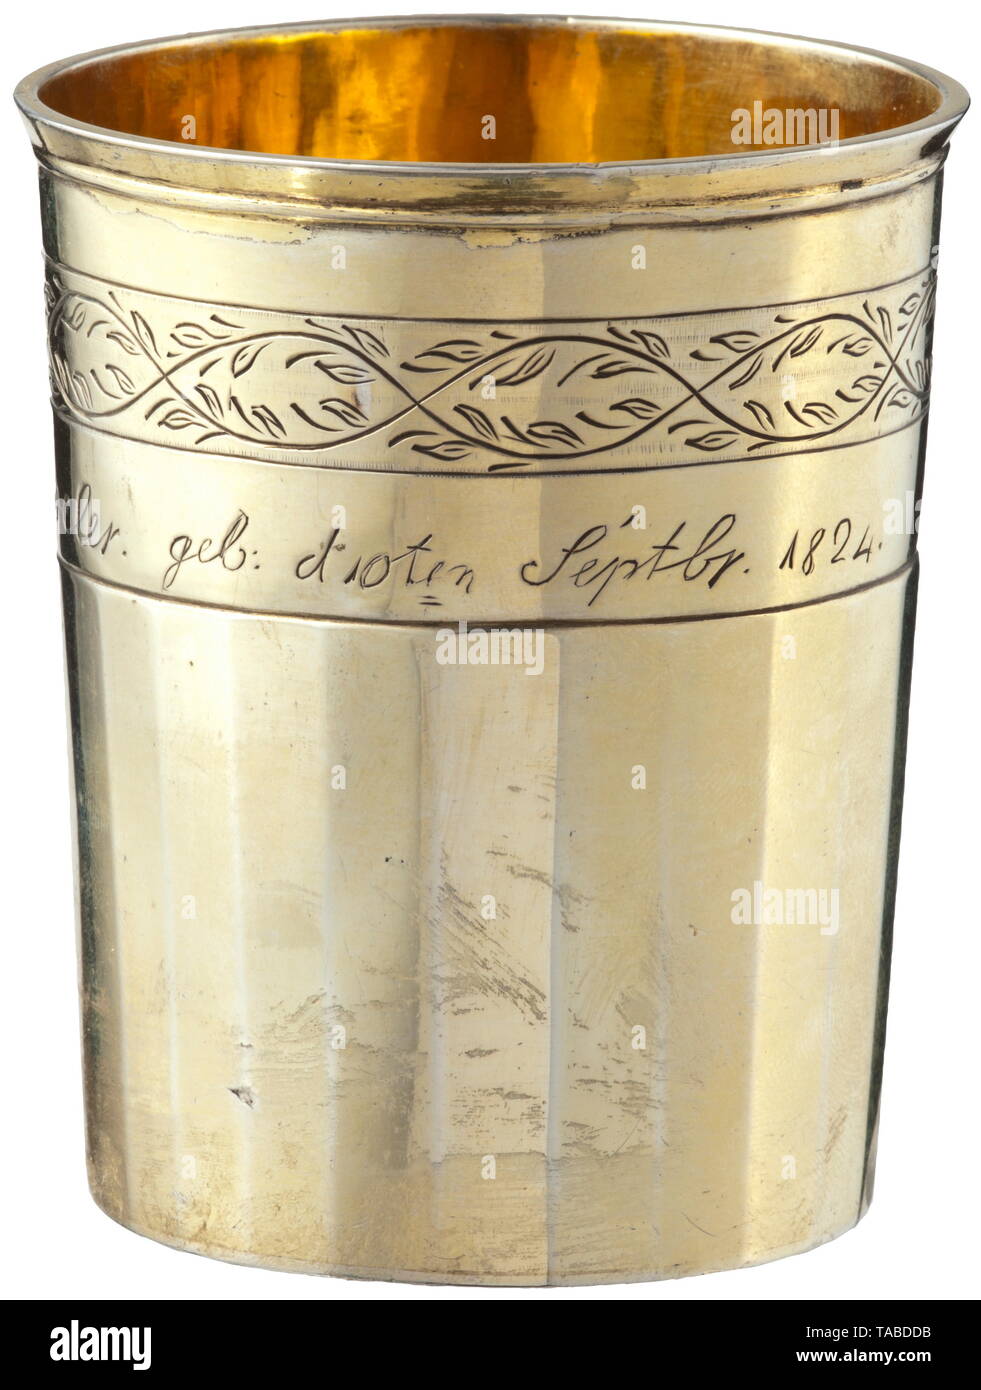 A silver cup, Viljandi, 18th century Faceted, slightly rubbed cup, the interior and exterior gold-plated, with slightly flared rim and simple tendril engraving, inscribed and dated 'Sophie Schoeler. geb. d 10ten Septbr. 1824' (tr. 'Sophie Schoeler. born 10 Sept. 1824'). The bottom engraved 'C.F. Göns. geb. d4.Juni1753 gest: d21 Juni 1830.' (tr. 'C.F. Göns. born 4 June 1753 died 21 June 1830.') and stamped with manufacturer's marks 'FG' and marks of fineness. Height 8 cm, weight 149.6 g. historic, historical, handicrafts, handcraft, craft, object,, Additional-Rights-Clearance-Info-Not-Available Stock Photo